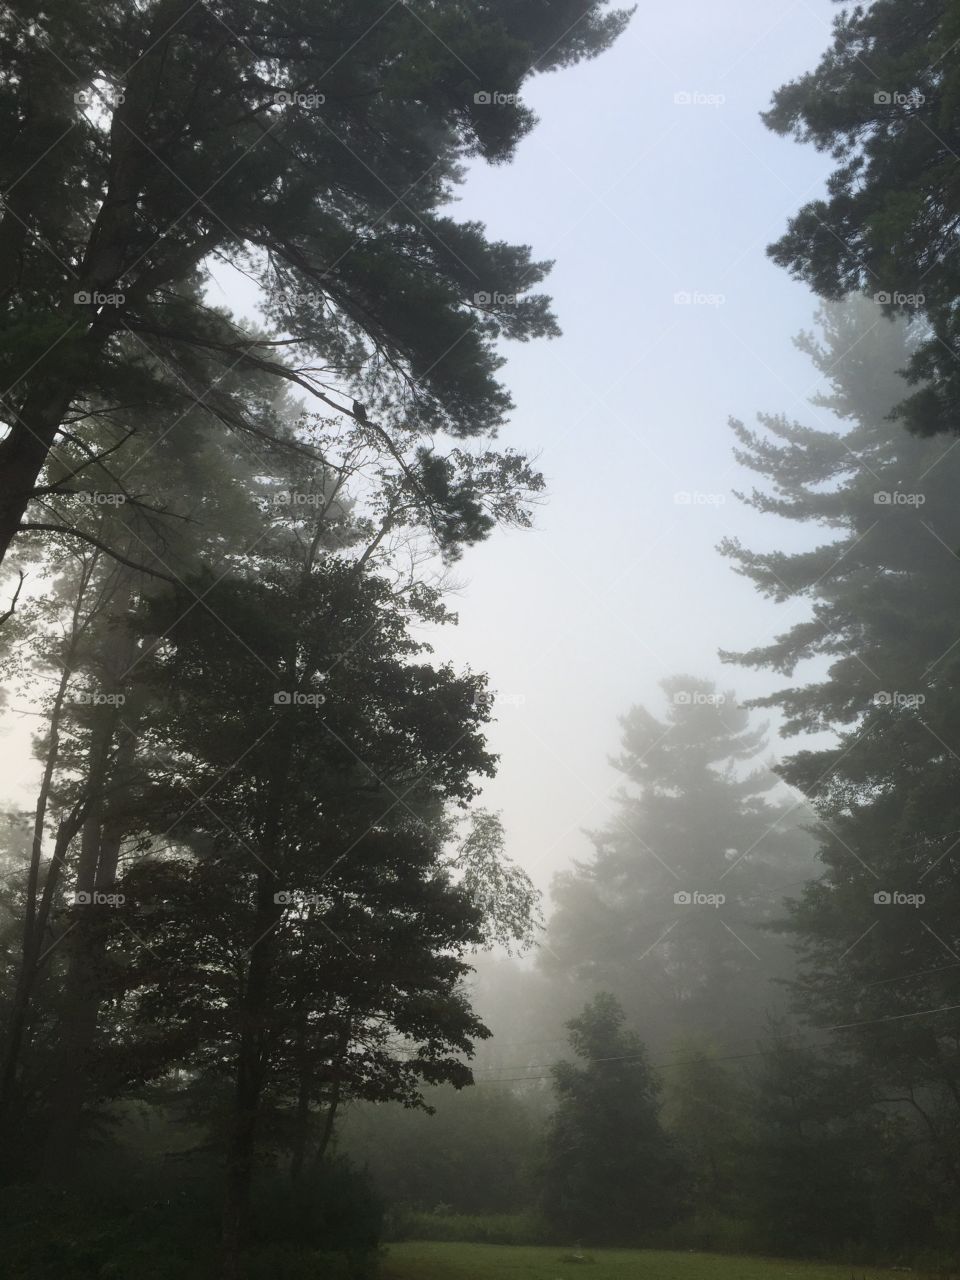 Foggy morning . Enjoying an early cup of tea outside and noticed the fog was still lingering in the pines. 